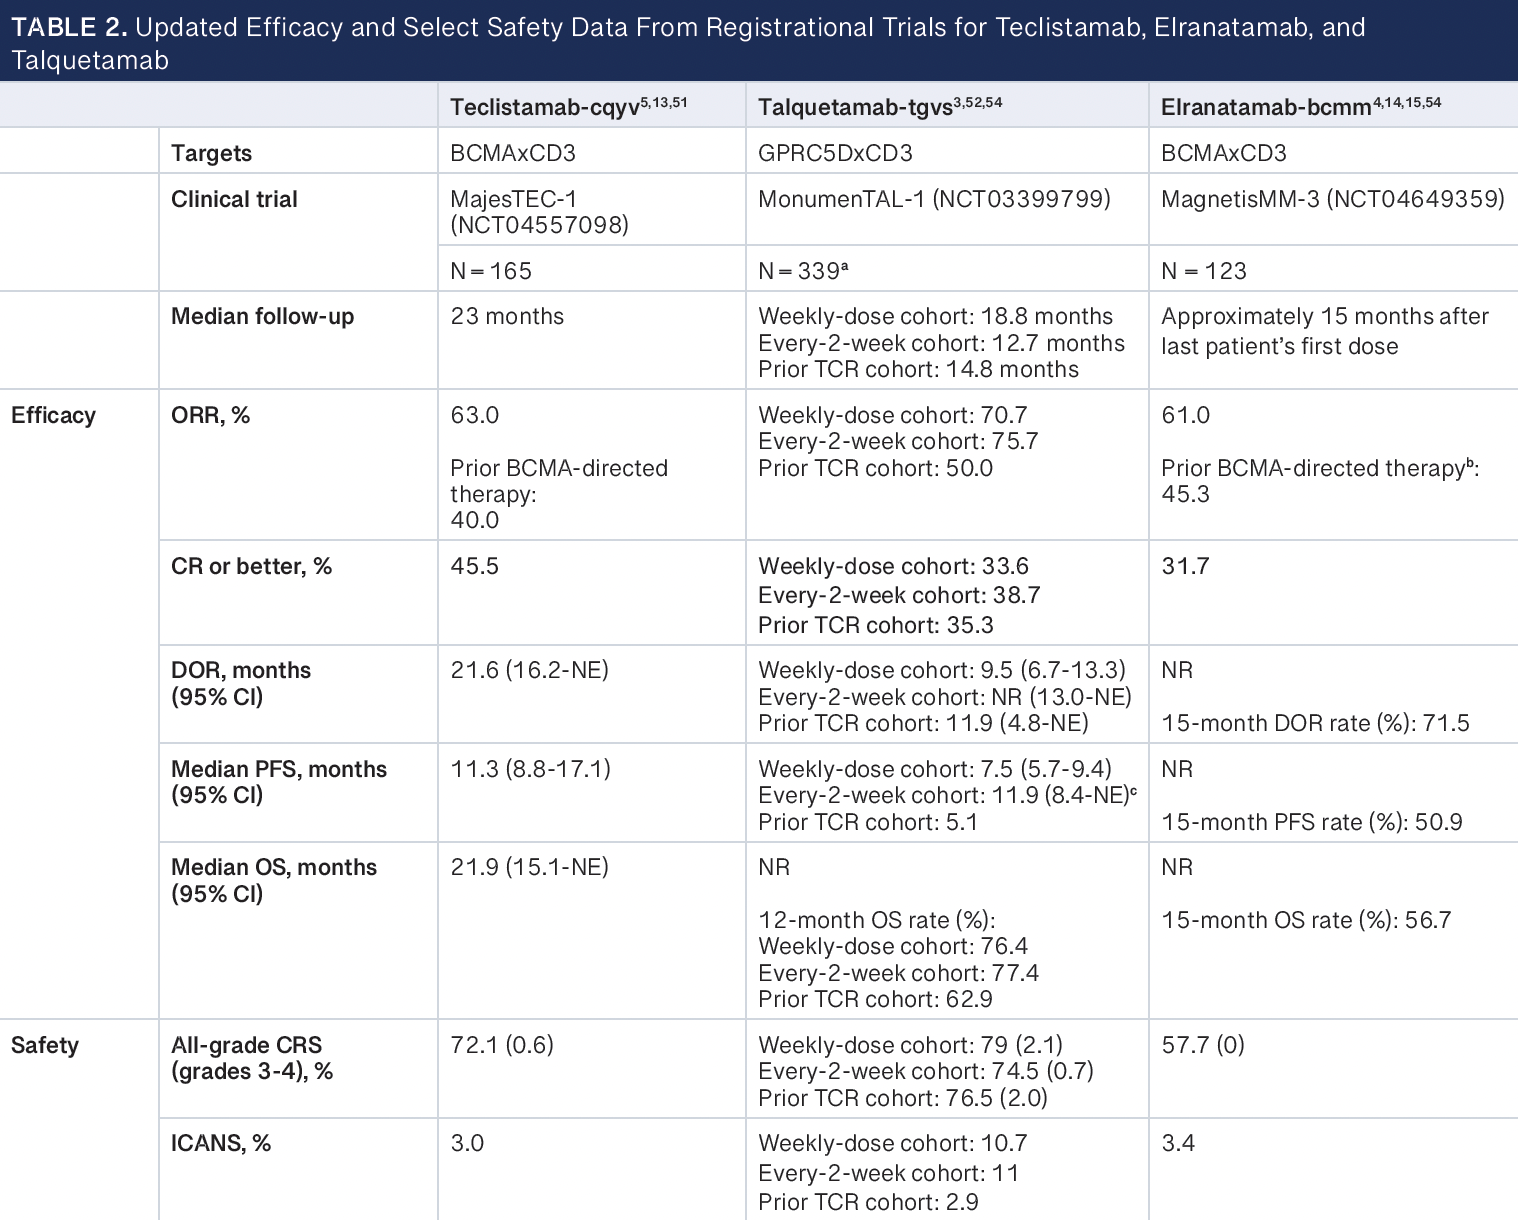 Table 2: Updated Efficacy and Select Safety Data from Registrational Trials for Teclistamab, Elranatamab, and Talquetamab -- BCMA, B-cell maturation antigen; CR, complete response; CRS, cytokine release syndrome; DOR, duration of response; GPRC5D, G protein–coupled receptor family C group 5 member D; ICANS, immune effector cell–associated neurotoxicity syndrome; NE, not estimable; NR, not reached; ORR, overall response rate; OS, overall survival; PFS, progression-free survival; TCR, T-cell redirection. 288 patients received talquetamab 0.4 mg/kg weekly (n = 143) or 0.8 mg/kg every other week (n = 145), and the third cohort with 51 patients who had received prior TCR therapy received either talquetamab 0.4 mg/kg weekly or 0.8 mg/kg every other week. Pooled analysis of patients from MagnetisMM-1 (n = 13), MagnetisMM-3 (n = 64), and MagnetisMM-9 (n = 9).  61% of patients were censored at the time of analysis.